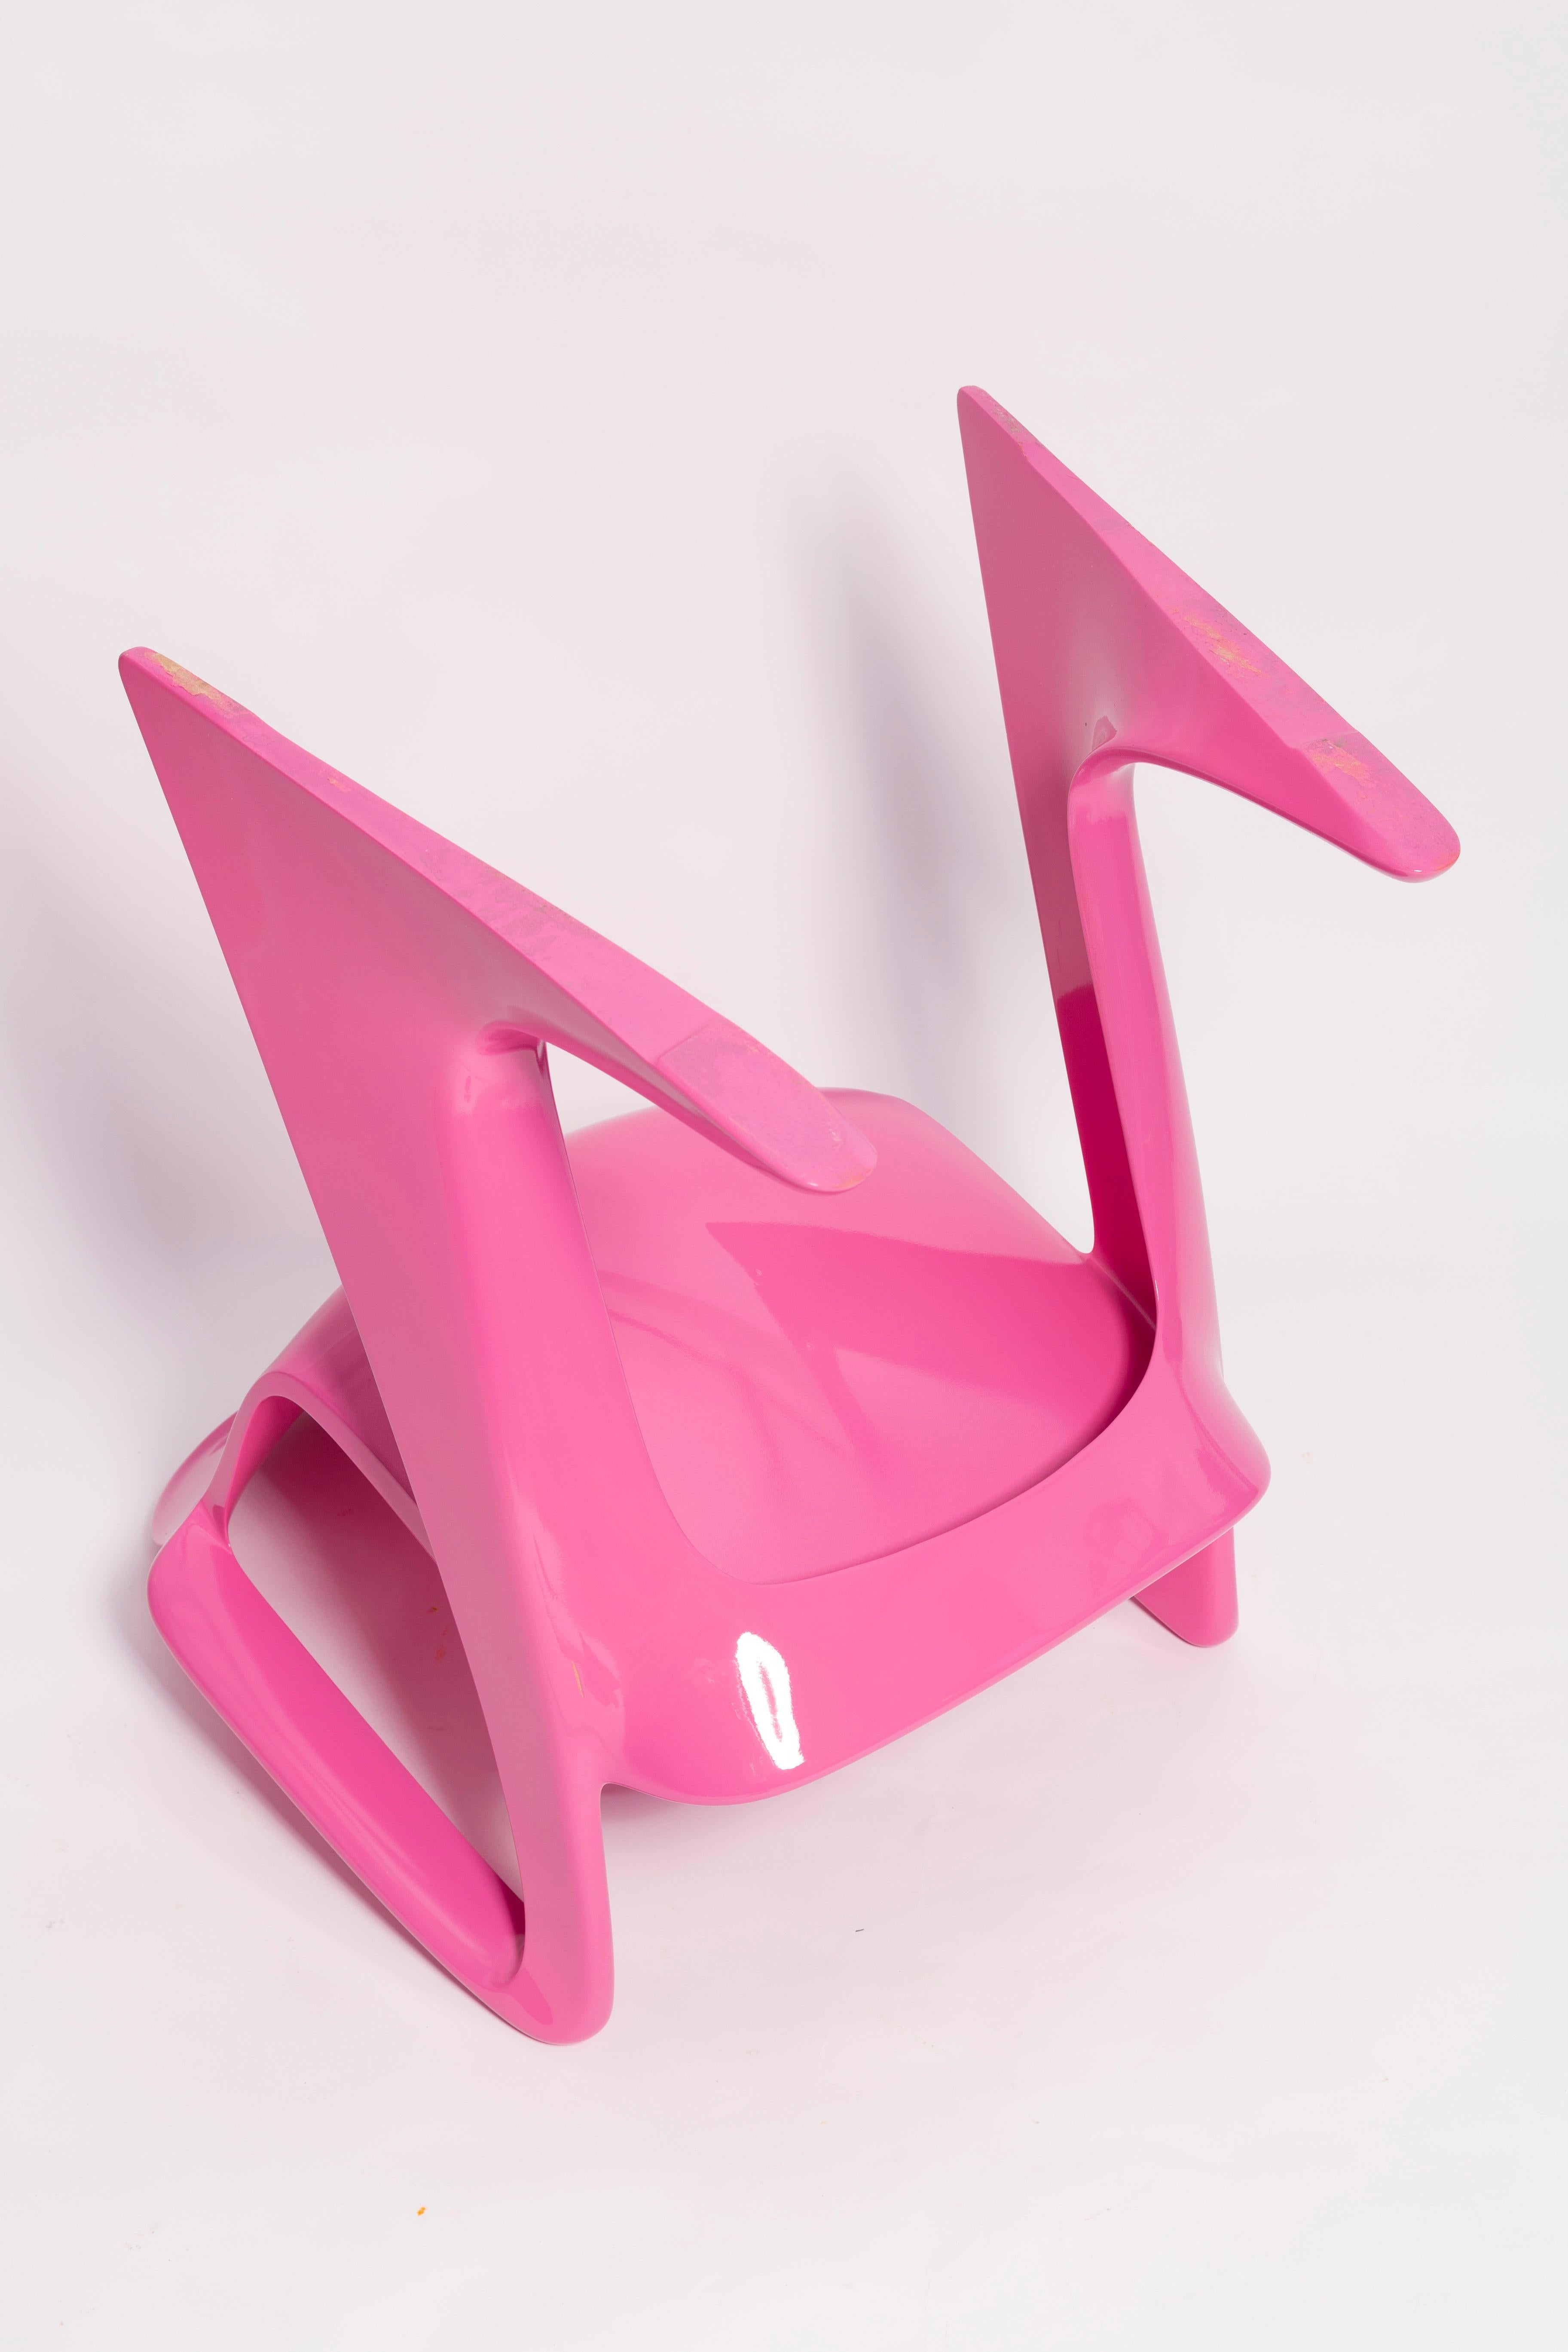 Set of Four Mid Century Pink Kangaroo Chairs, Ernst Moeckl, Germany, 1960s For Sale 4